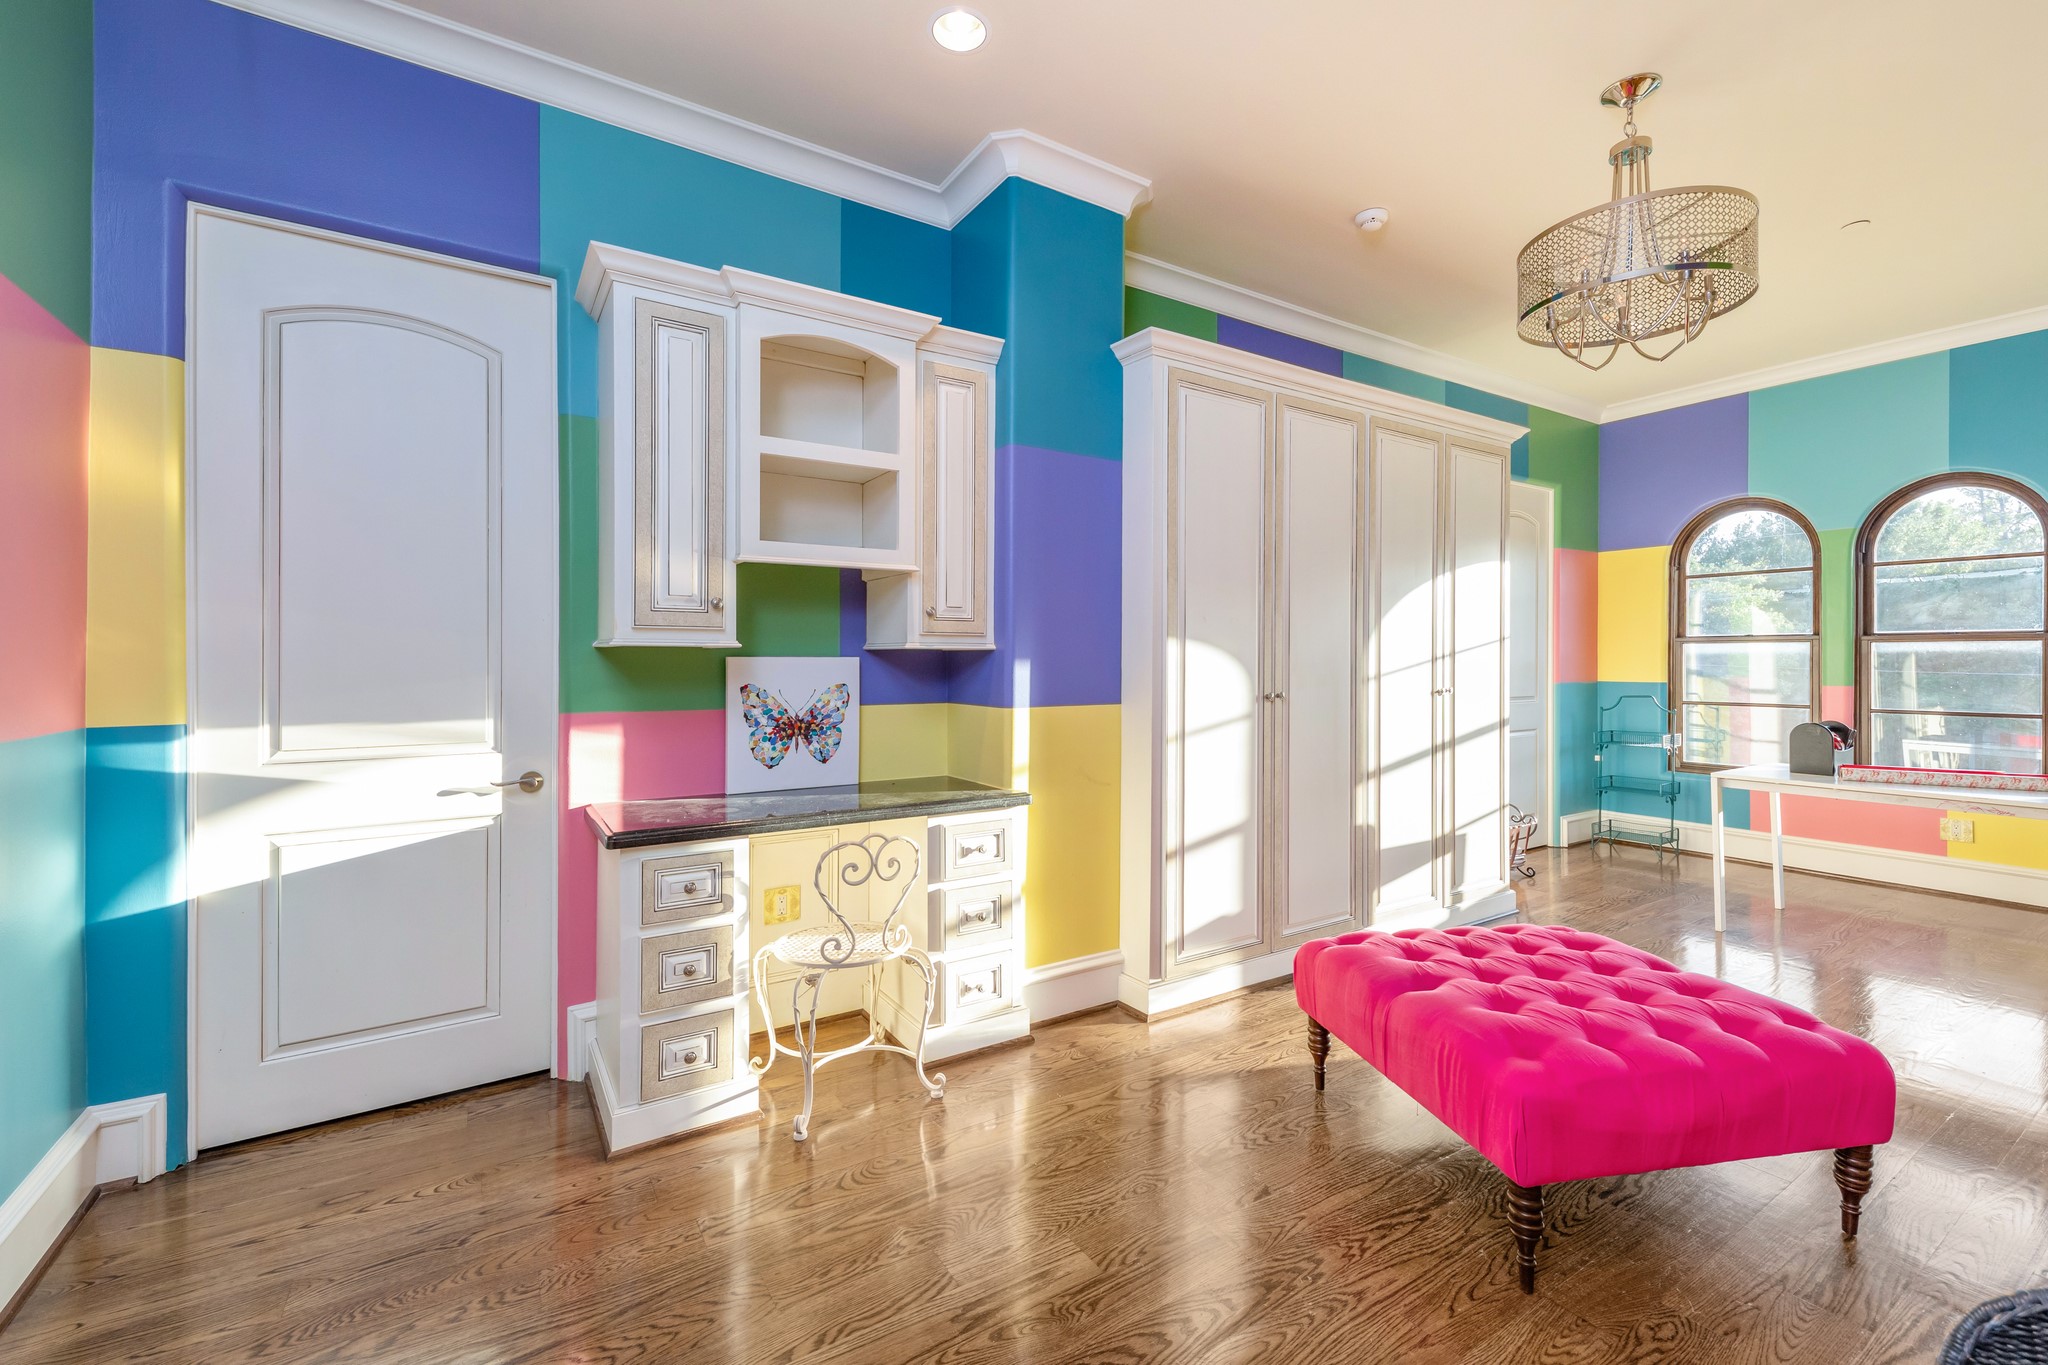 Uniquely thought out room designed for multi-use. Two sitting areas can be used for school work or crafts, room includes ample custom built-ins, custom paint details, three arched windows. On each side of the room you will find two additional ensuite bedrooms (nanny quarters).